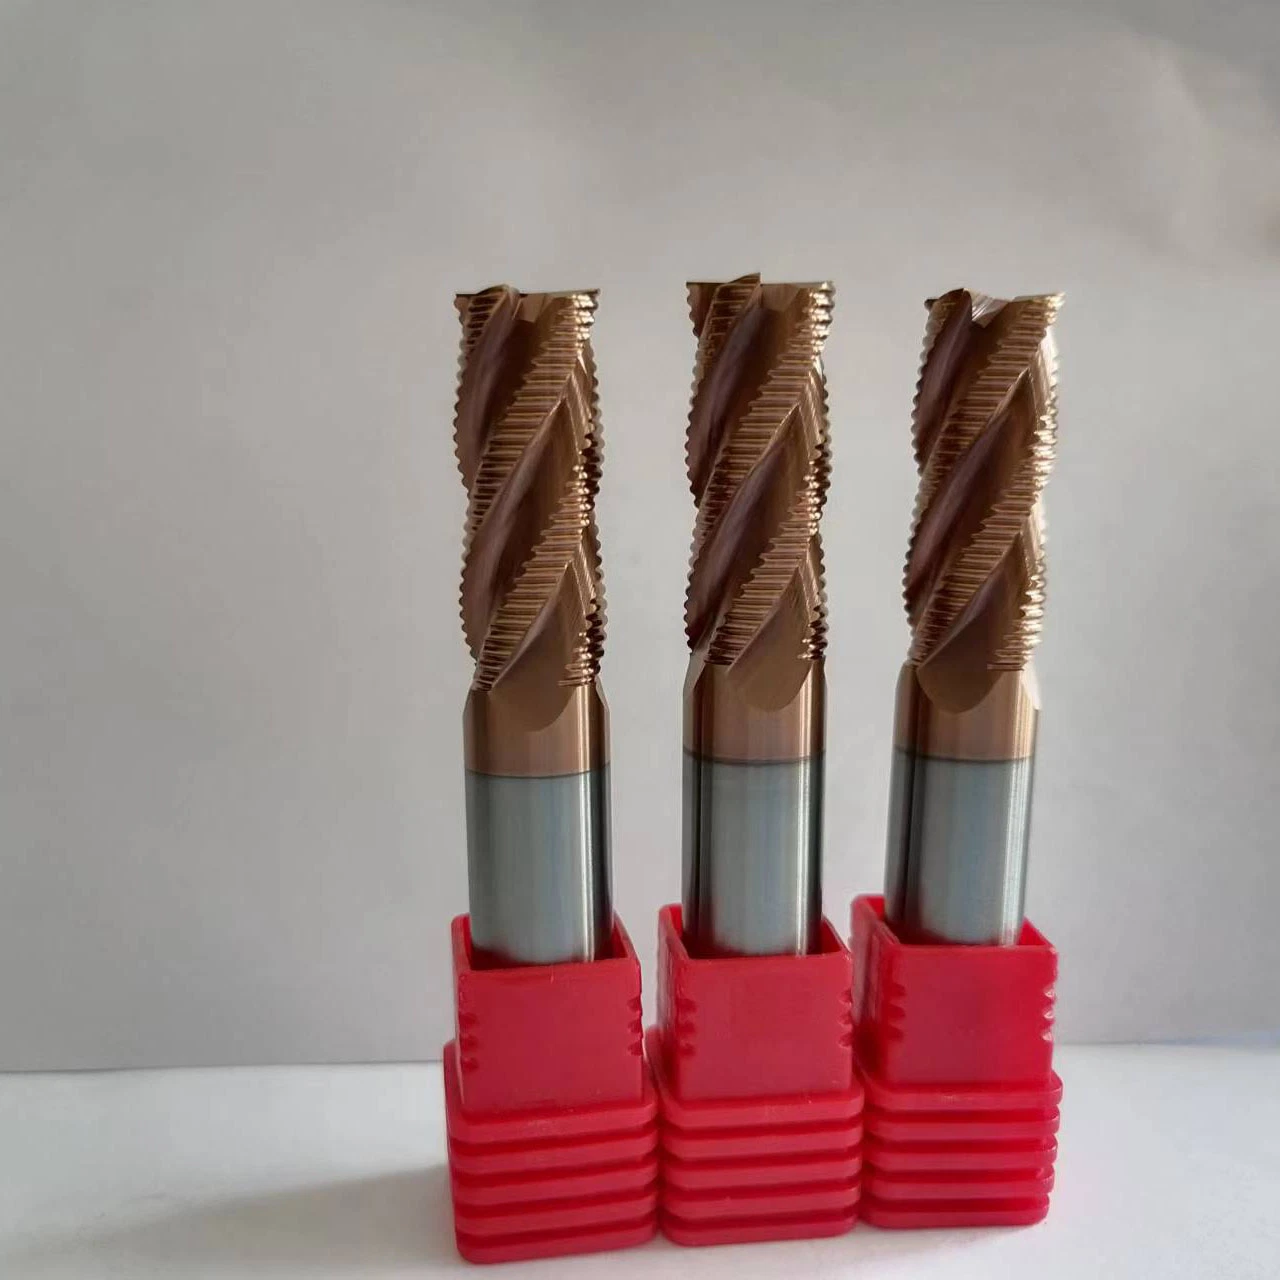 Changzhou 90 Degree Centering Drill HRC55/60 90 Degree Carbide Drills Solid Carbide Spotting Drill Bits for High Hardened Steels Cutting Tools